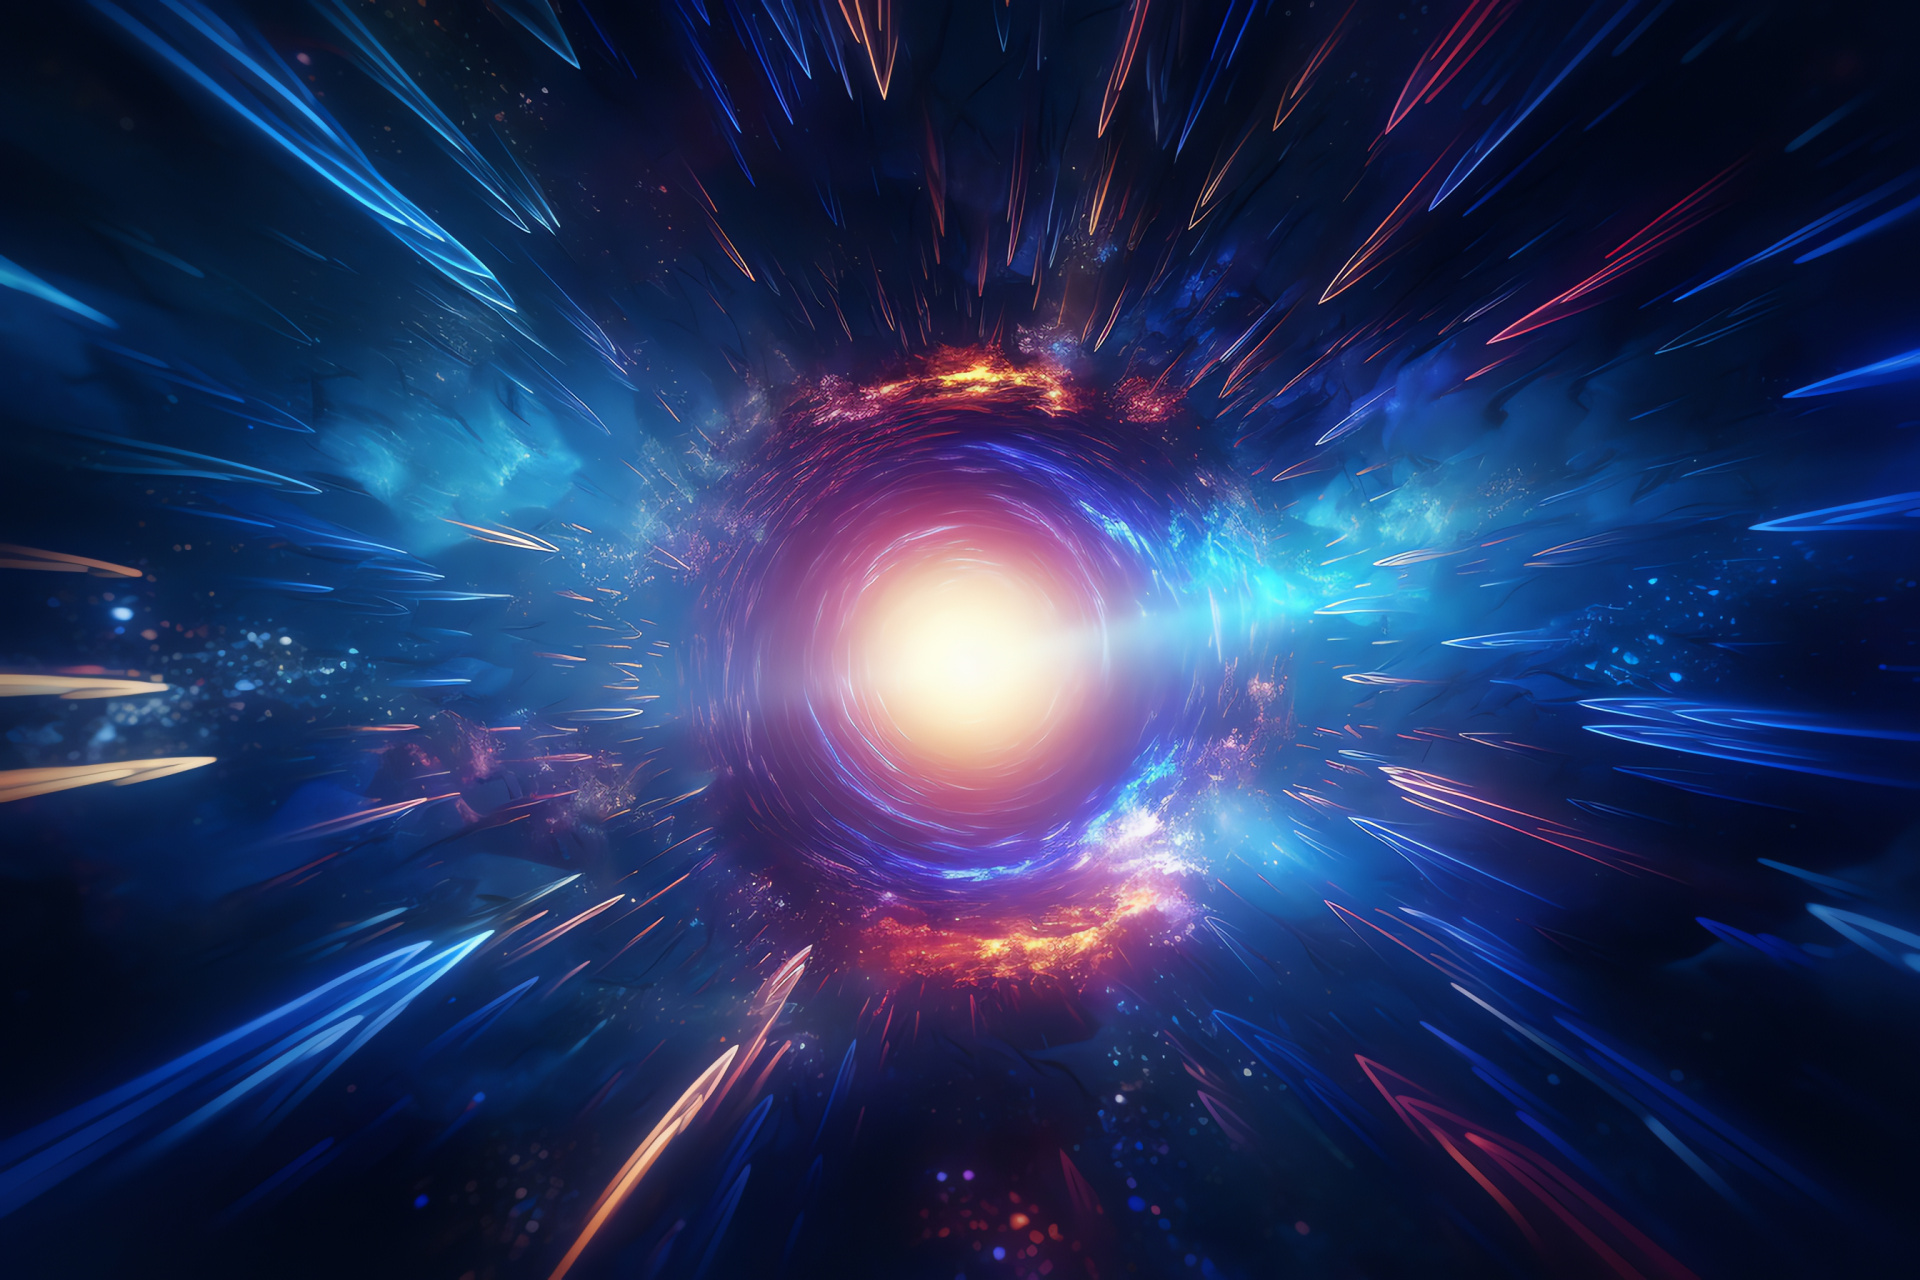 Space wormhole expanse, Hypothetical transit, Galactic journey, Electrifying space physics, Sci-fi reality concept, HD Desktop Image